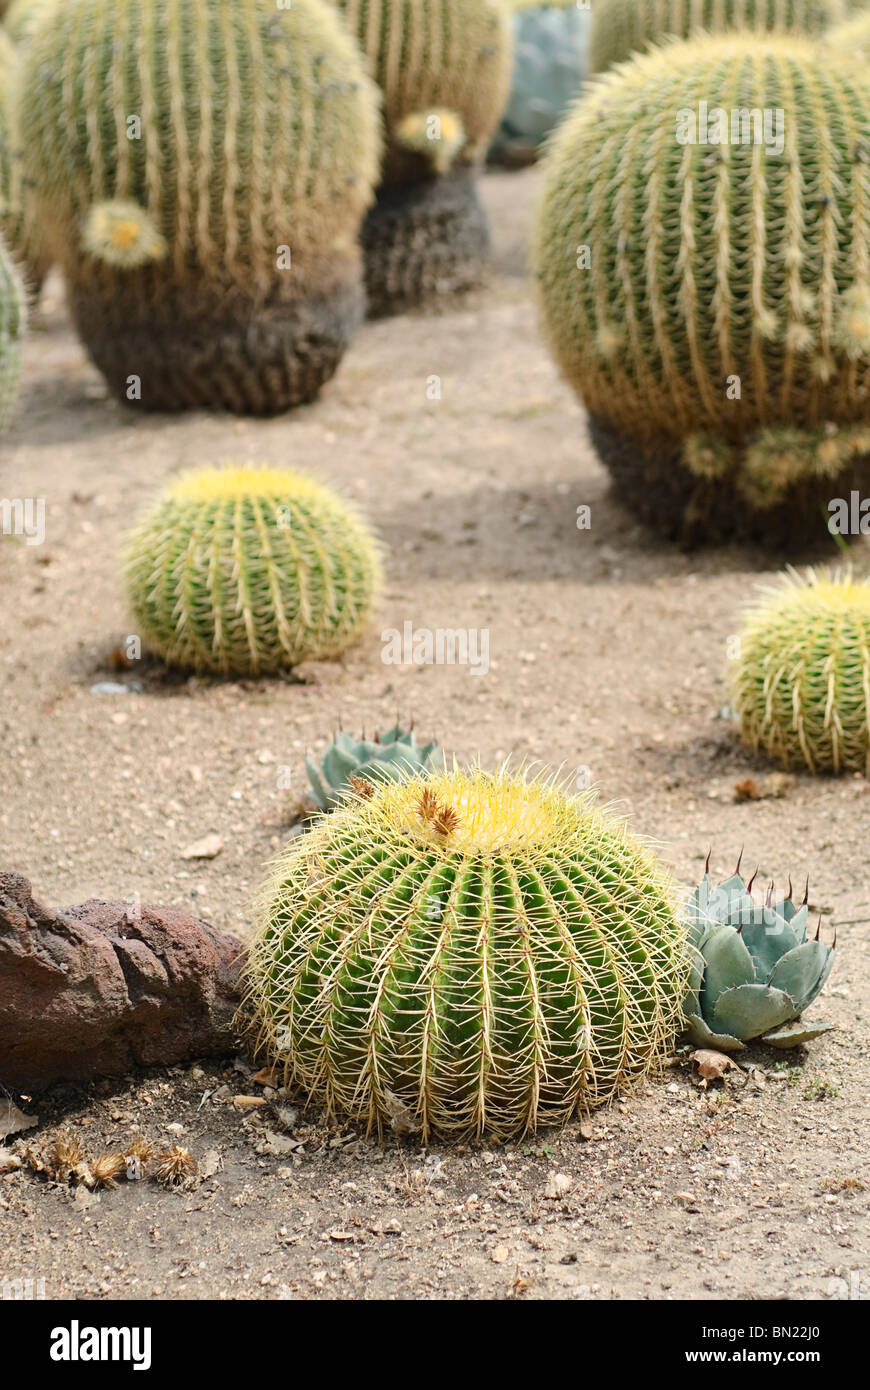 Echinocactus grusonii or Golden Barrel cactus is a well known species native to central Mexico. Stock Photo